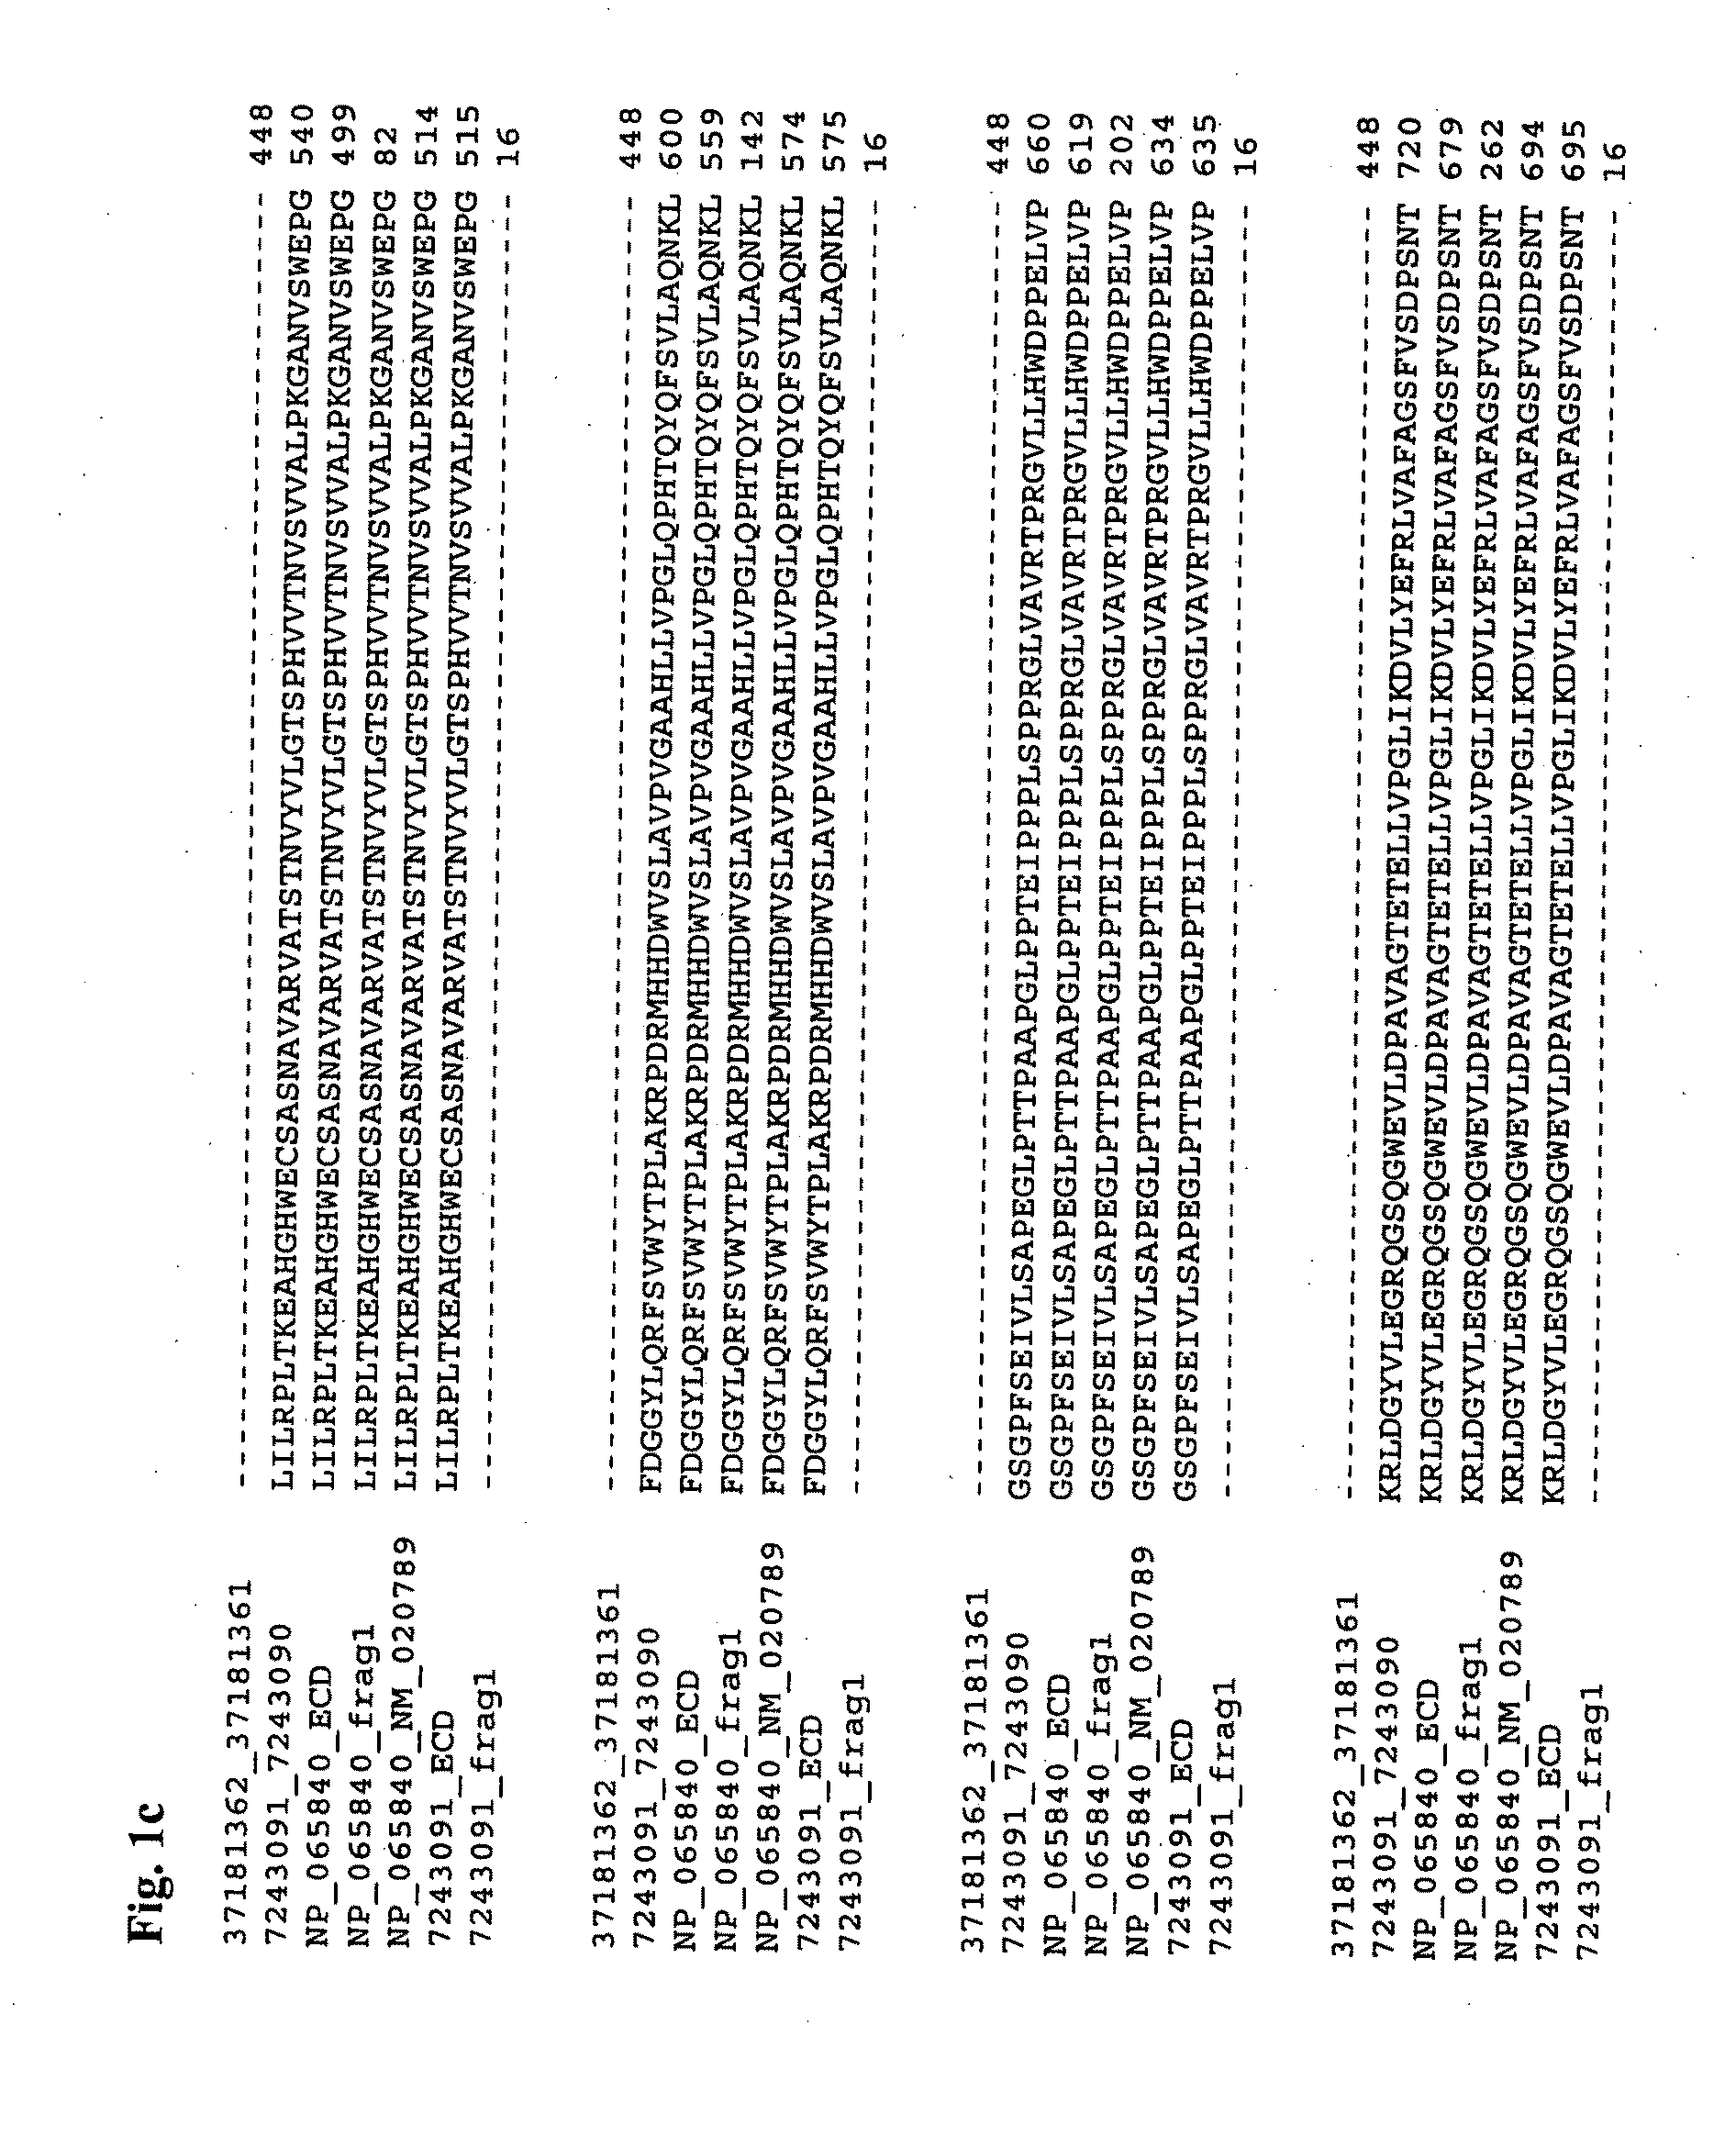 Compositions and methods of use for modulators of nectin 4, semaphorin 4b, igsf9, and kiaa0152 in treating disease